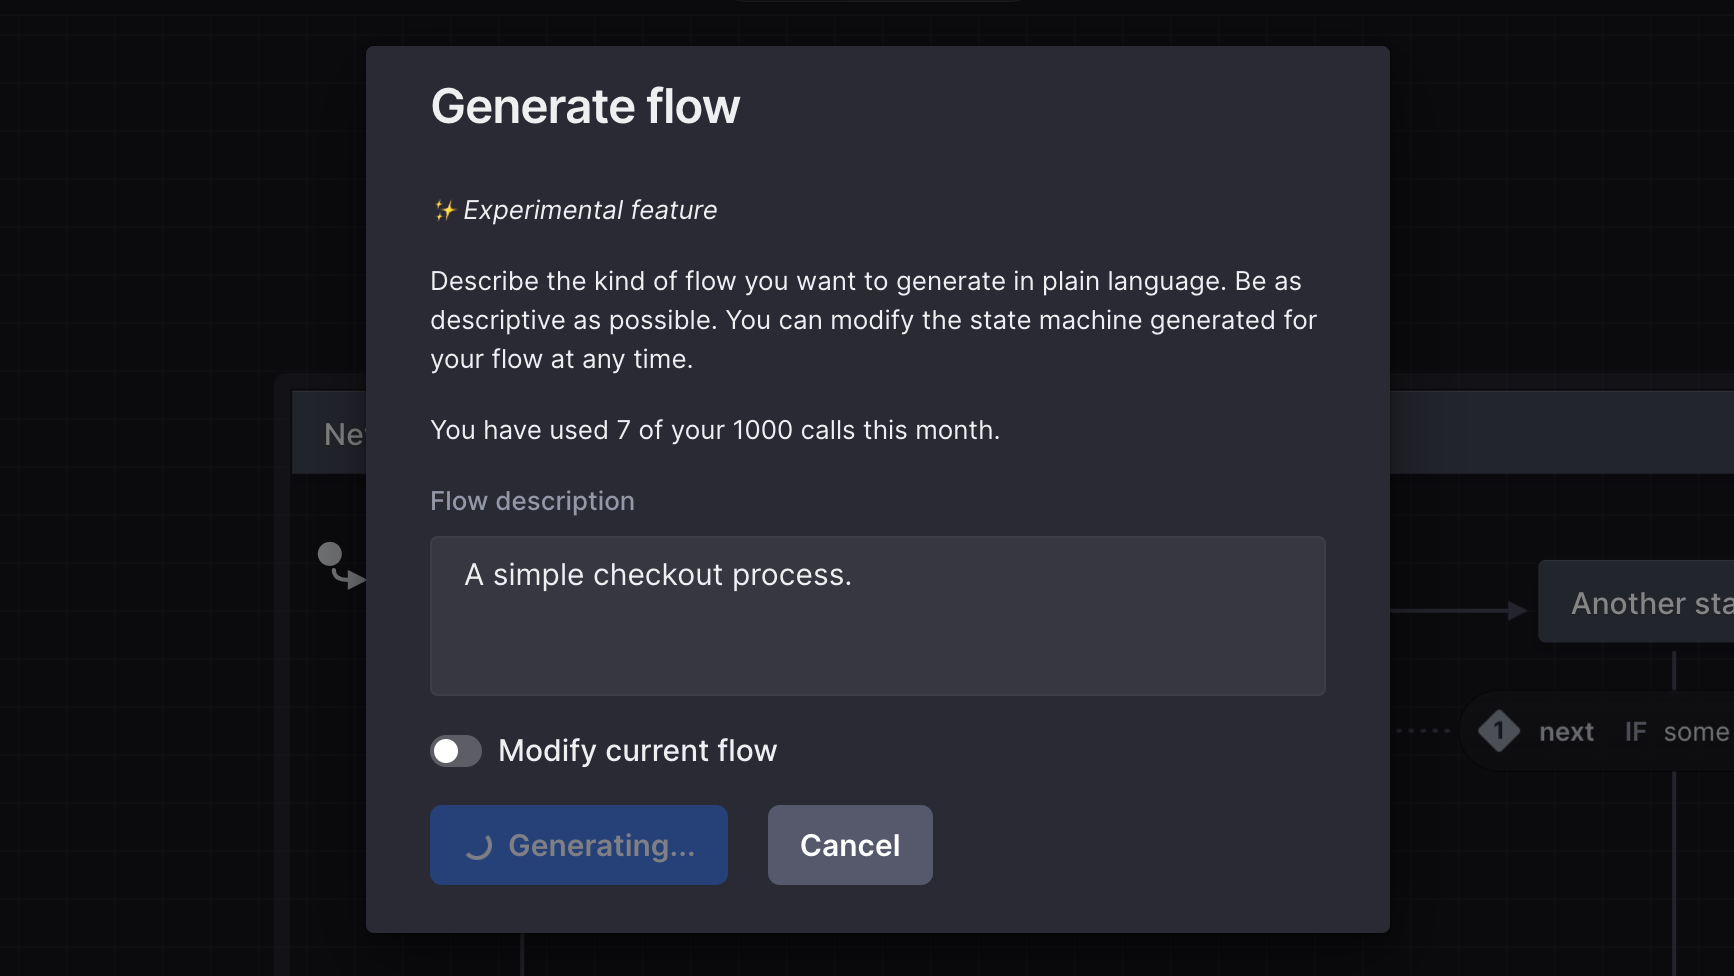 Generate flow dialog: Experimental feature. With the flow description of “A simple checkout process”, with the submit button “Generating flow” in progress.